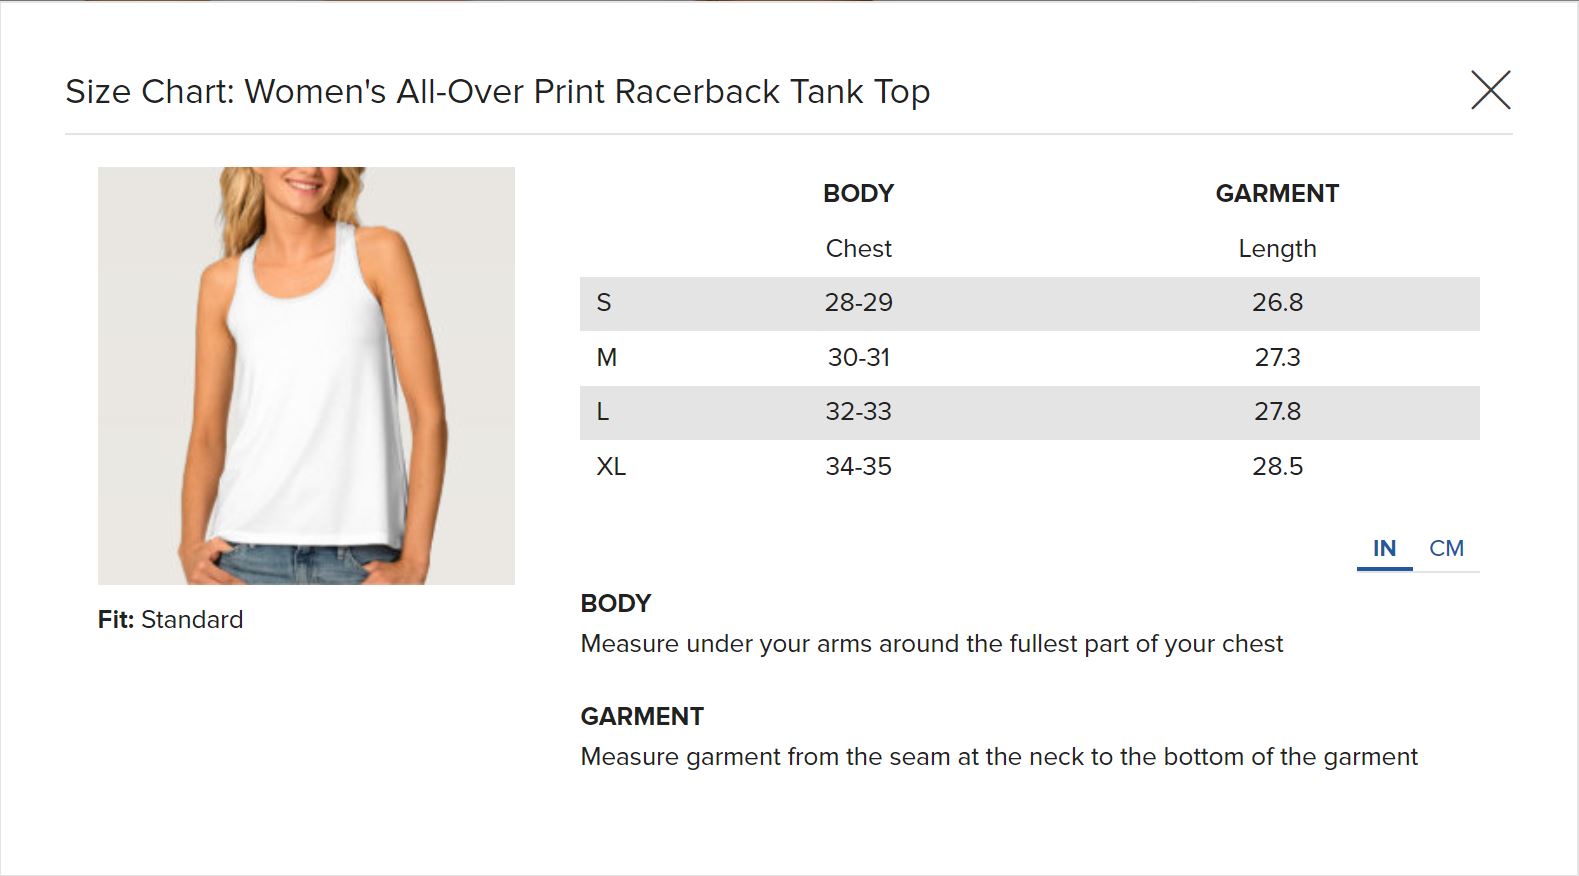 Women’s All-Over Print Racerback Tank Top_Size Chart